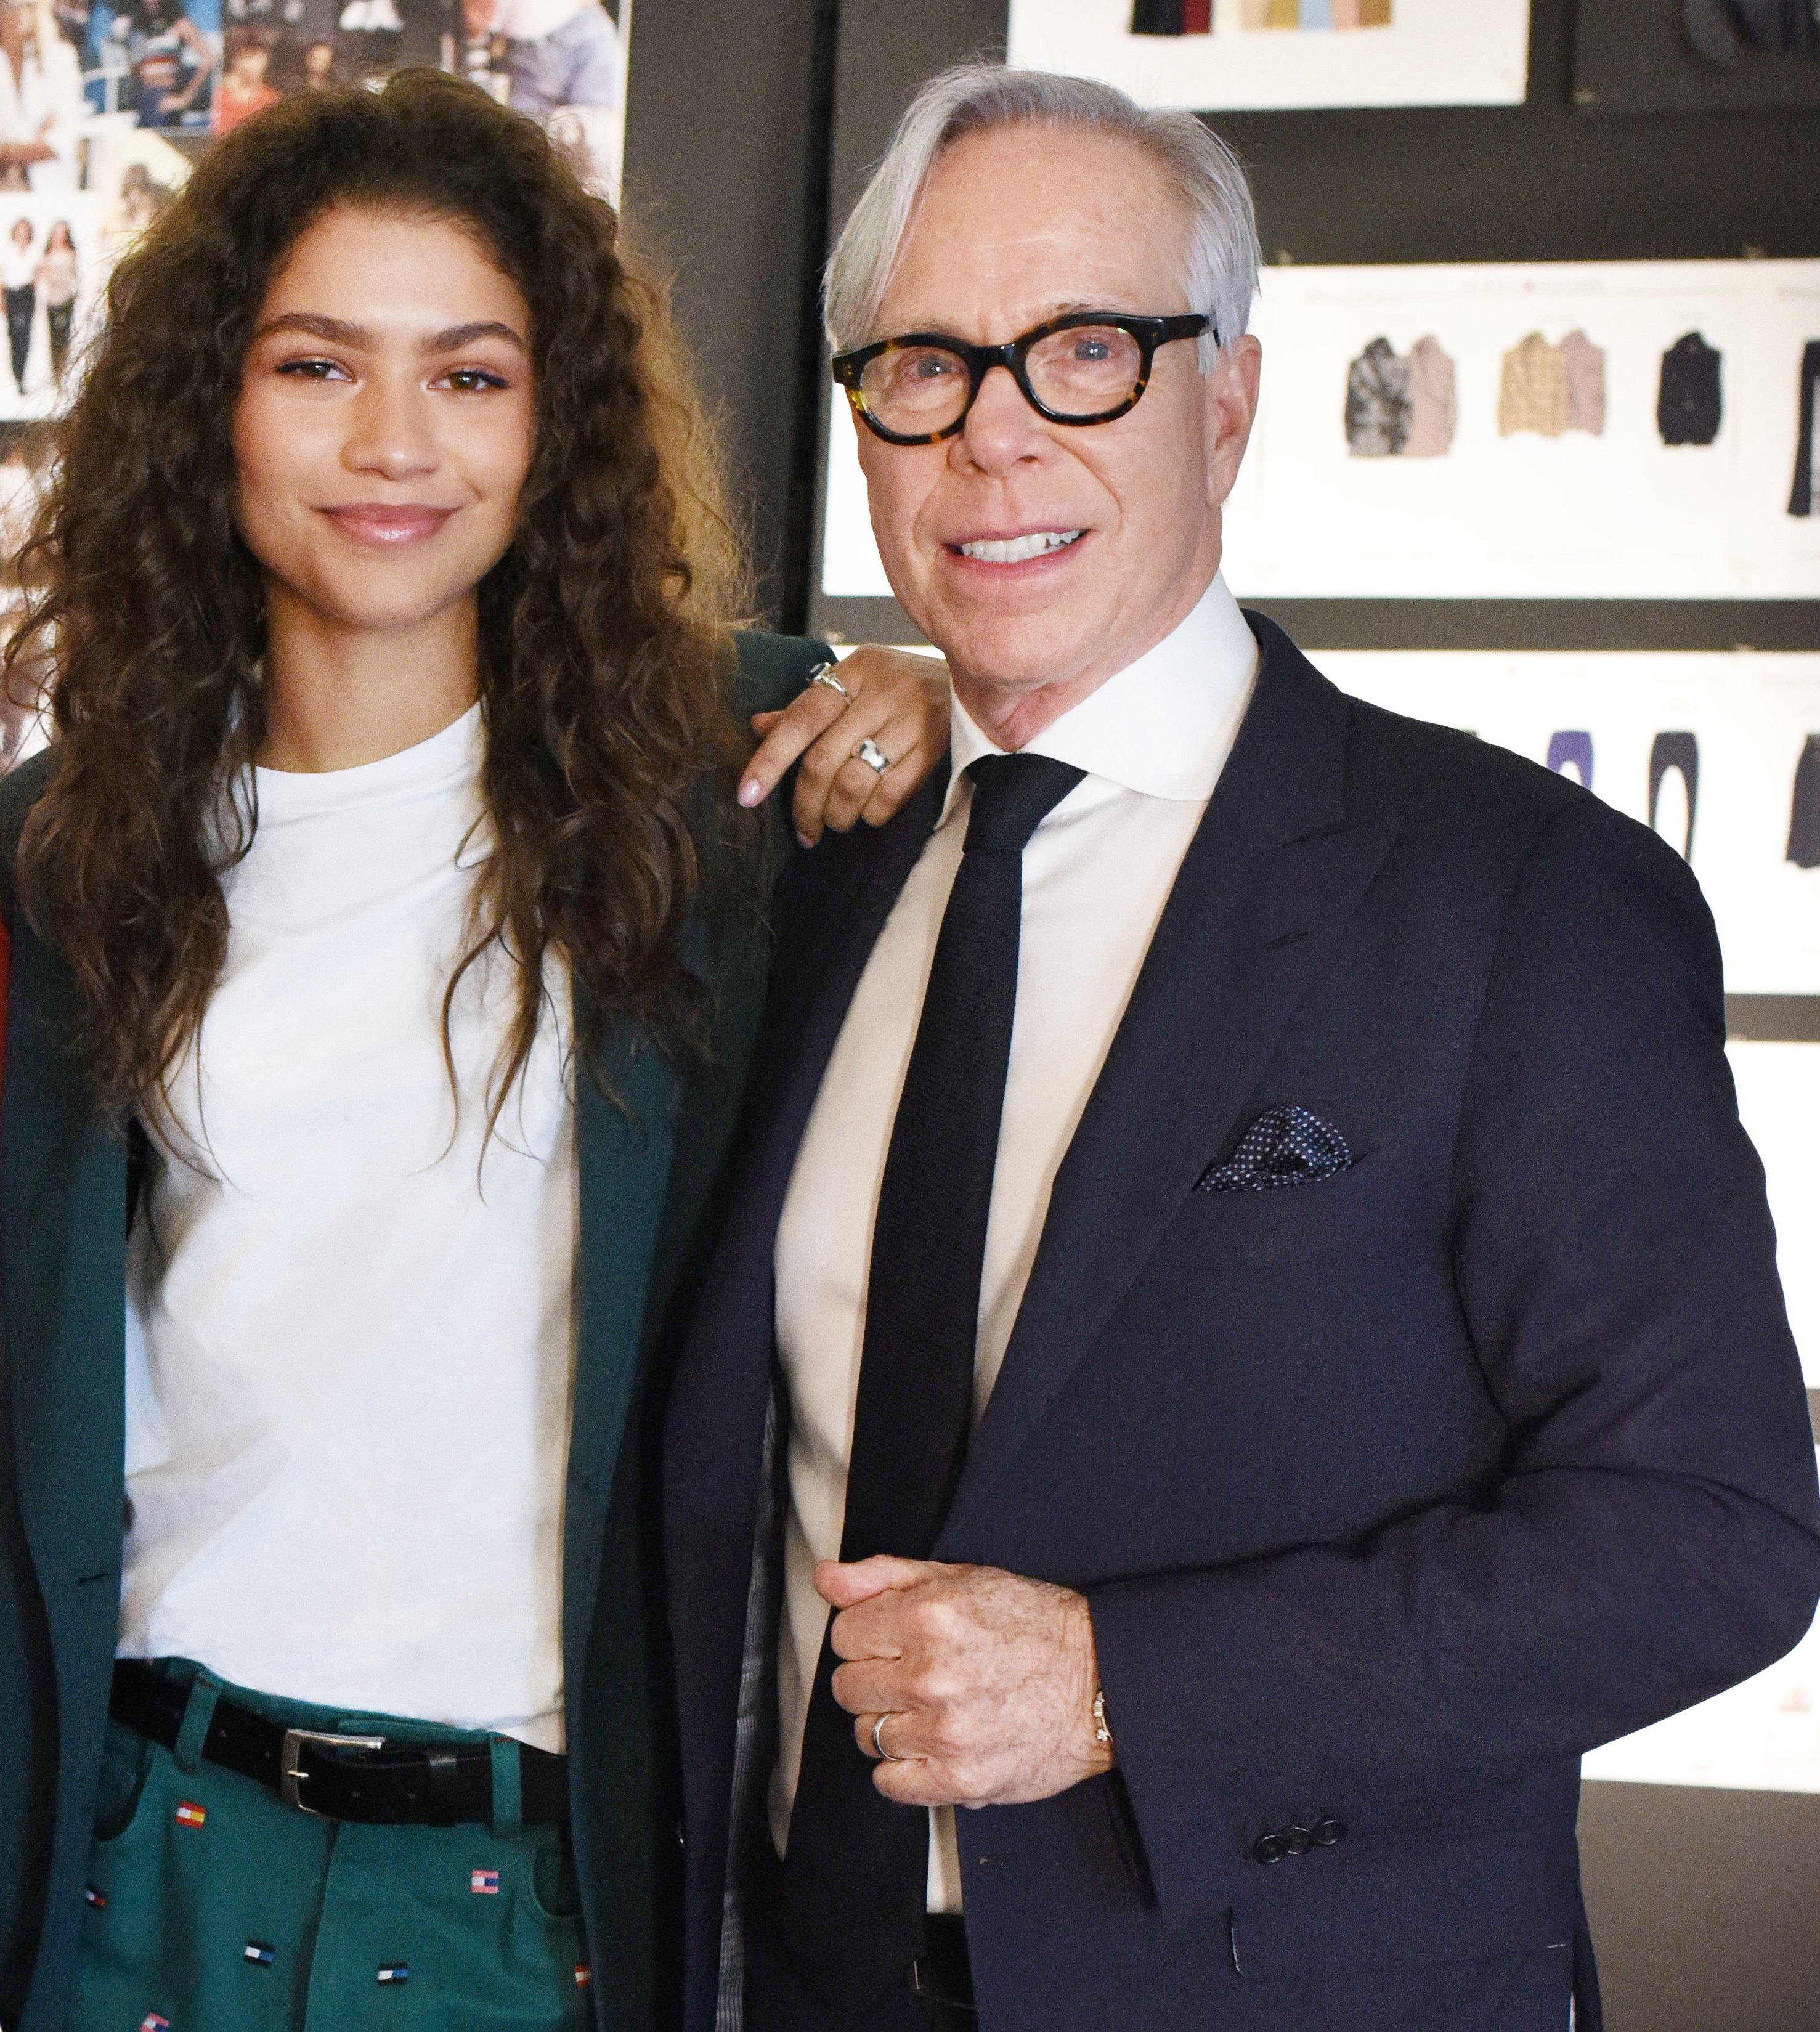 Tommy Hilfiger Announces Zendaya as the New Global Women's Ambassador and Co-Designer for TommyXZendaya Collection | Business Wire